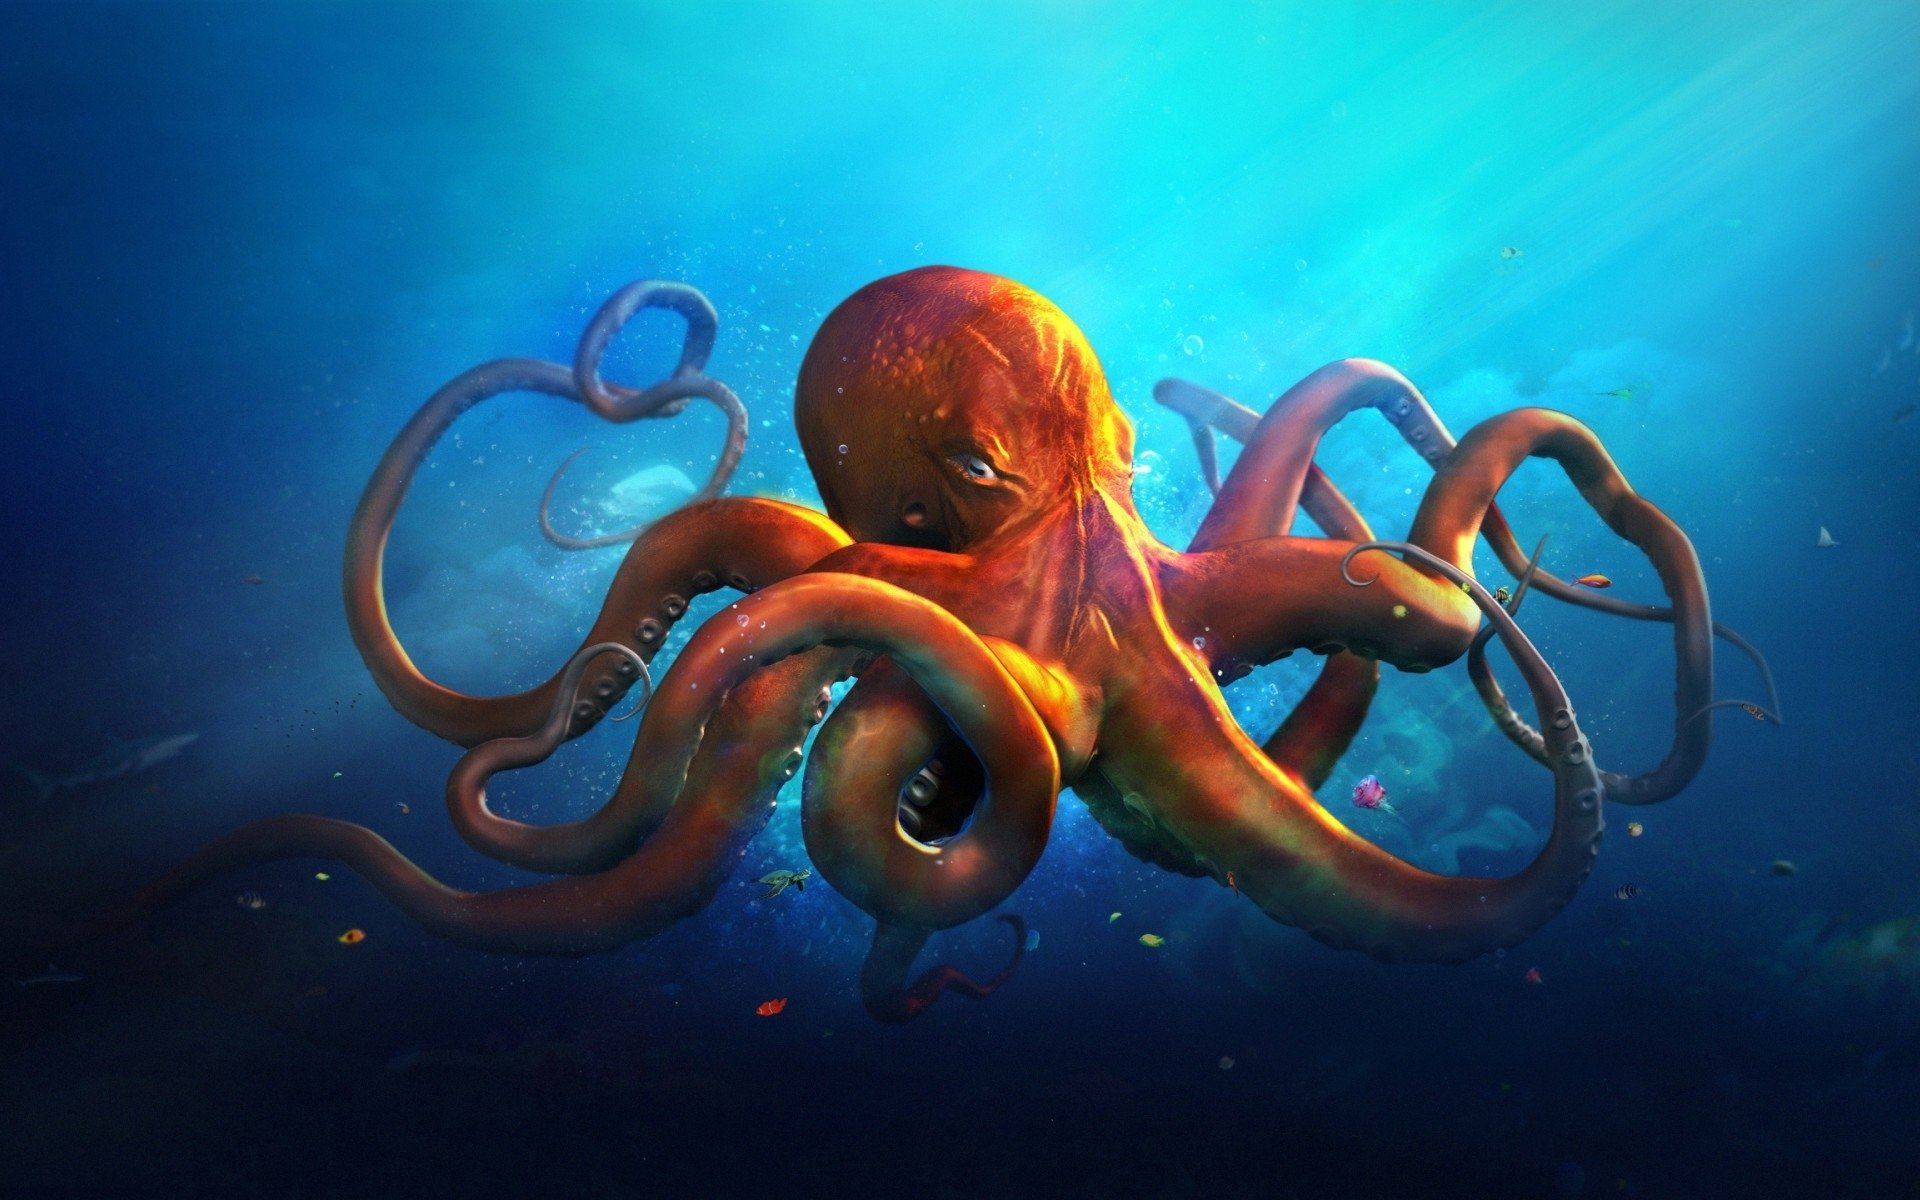 Octopus HD Wallpaper Background Image